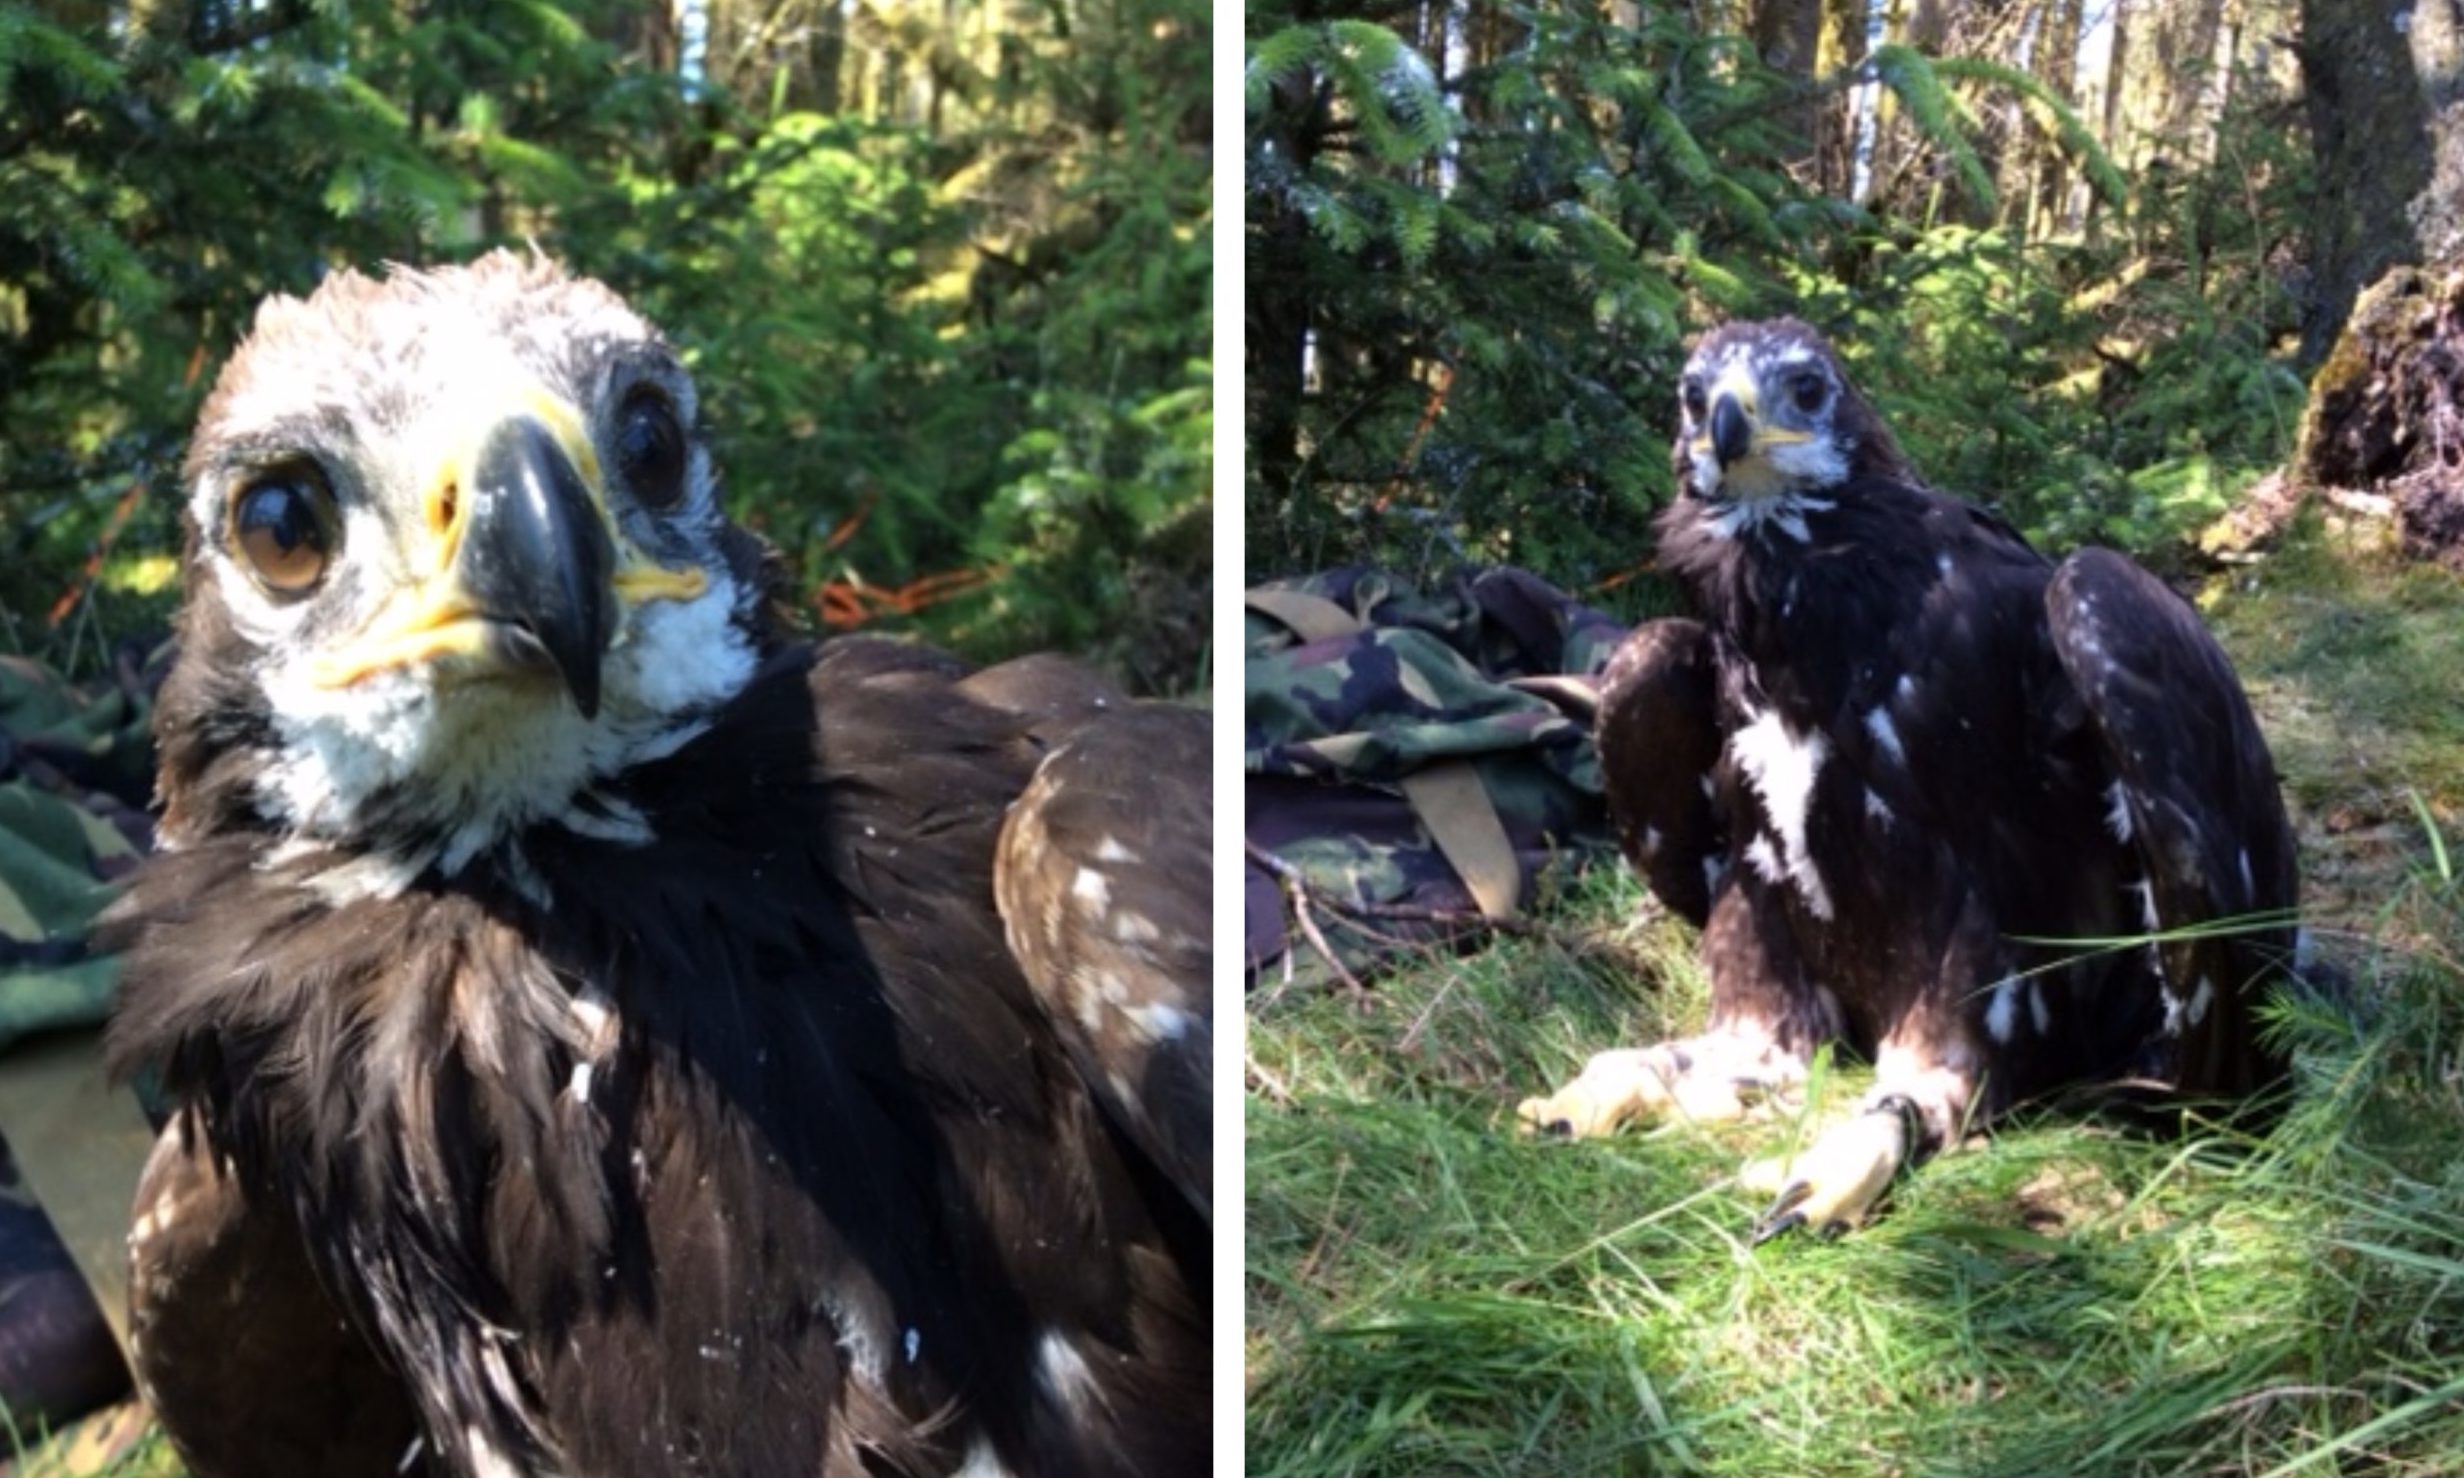 Photos of a young Tom the gold eagle by Raptor Persecution UK.